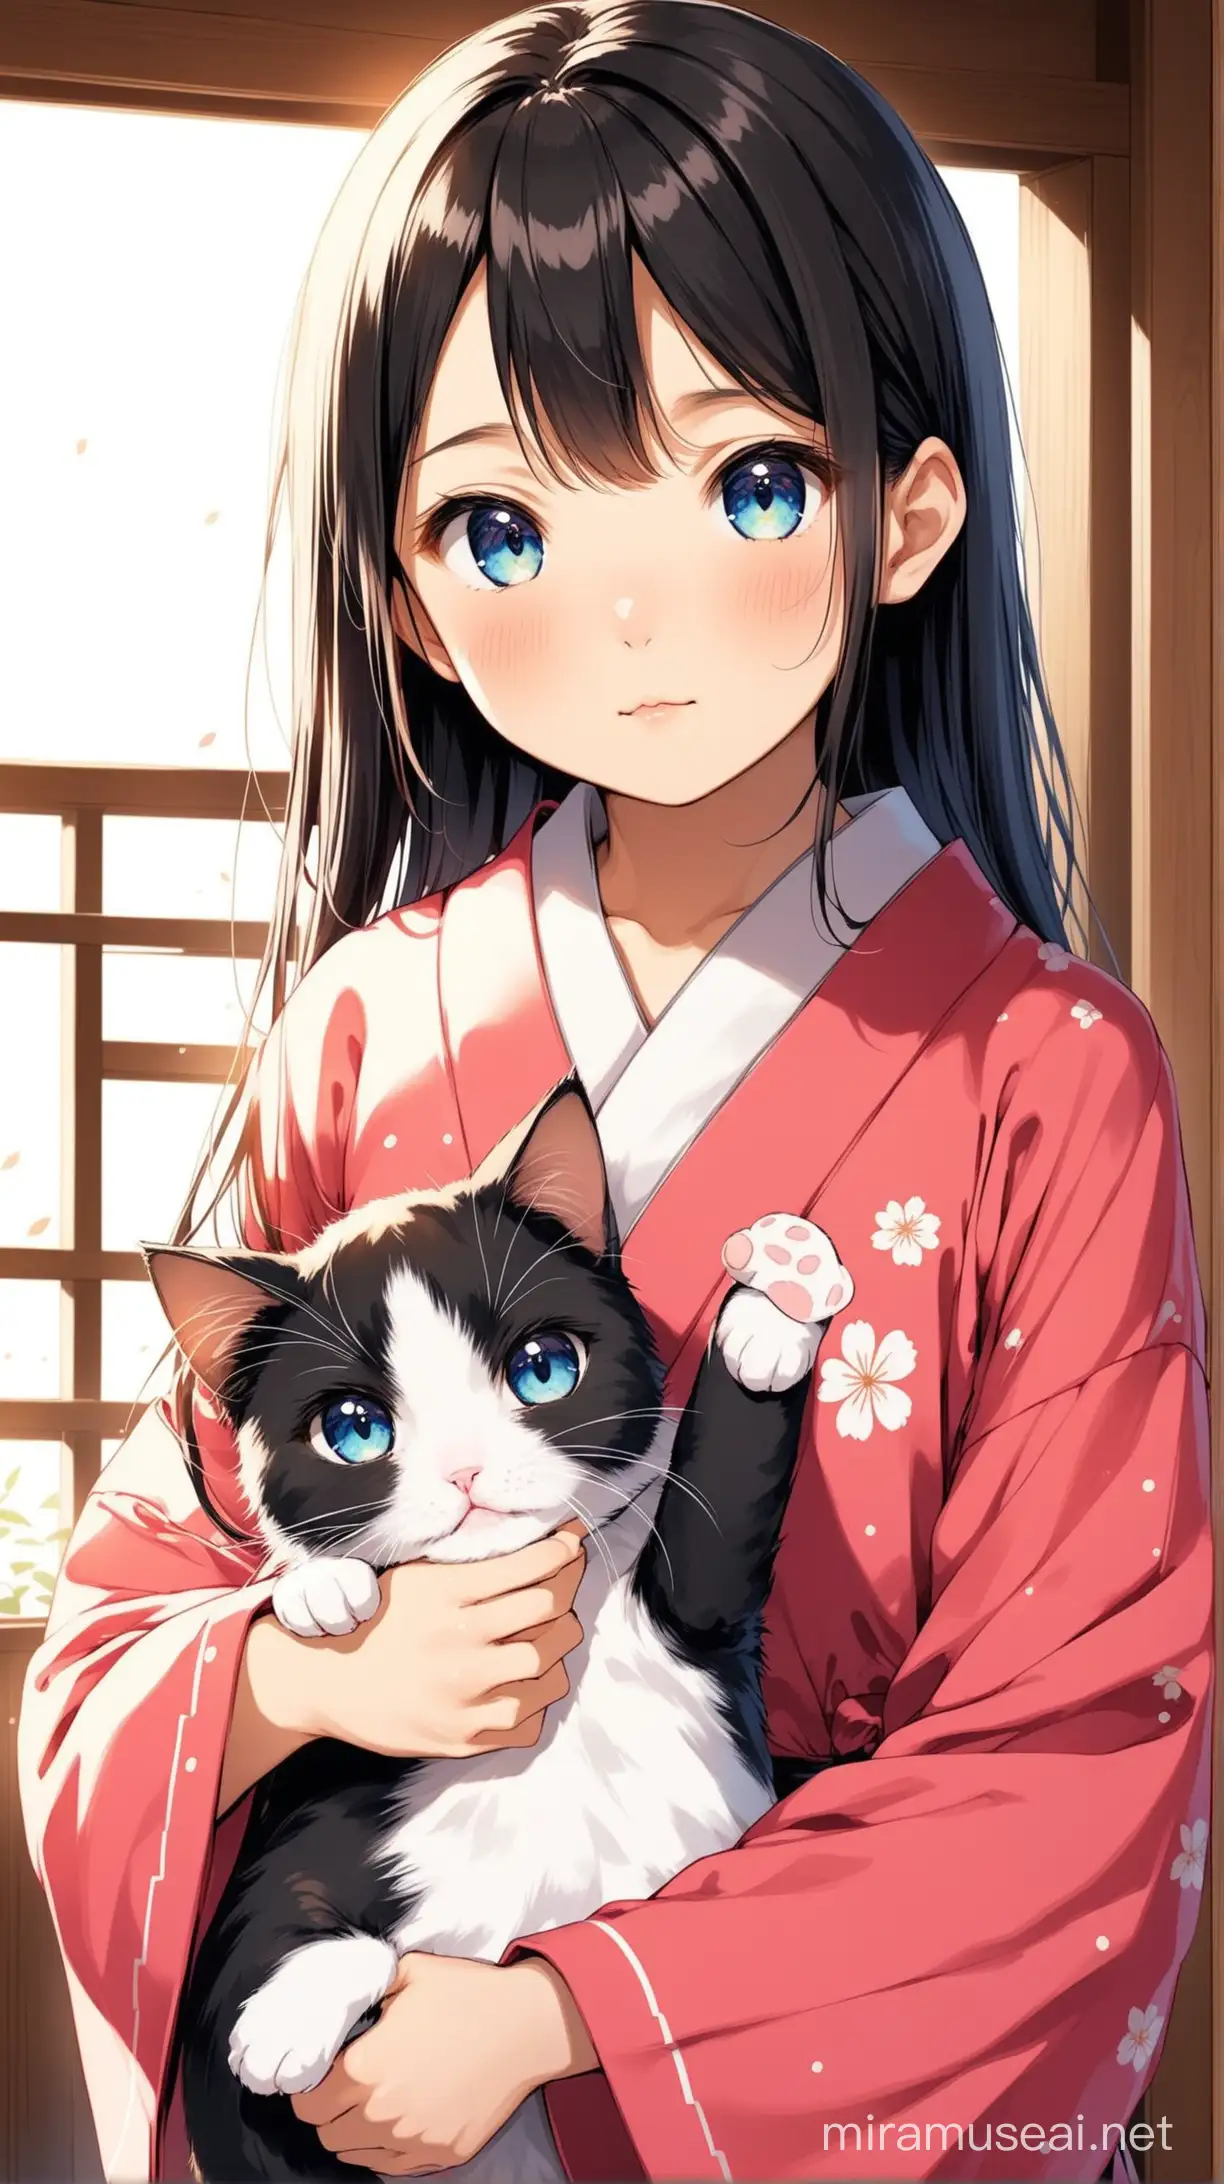 Adorable Japanese Girl Holding Cute Cat with Beautiful Eyes